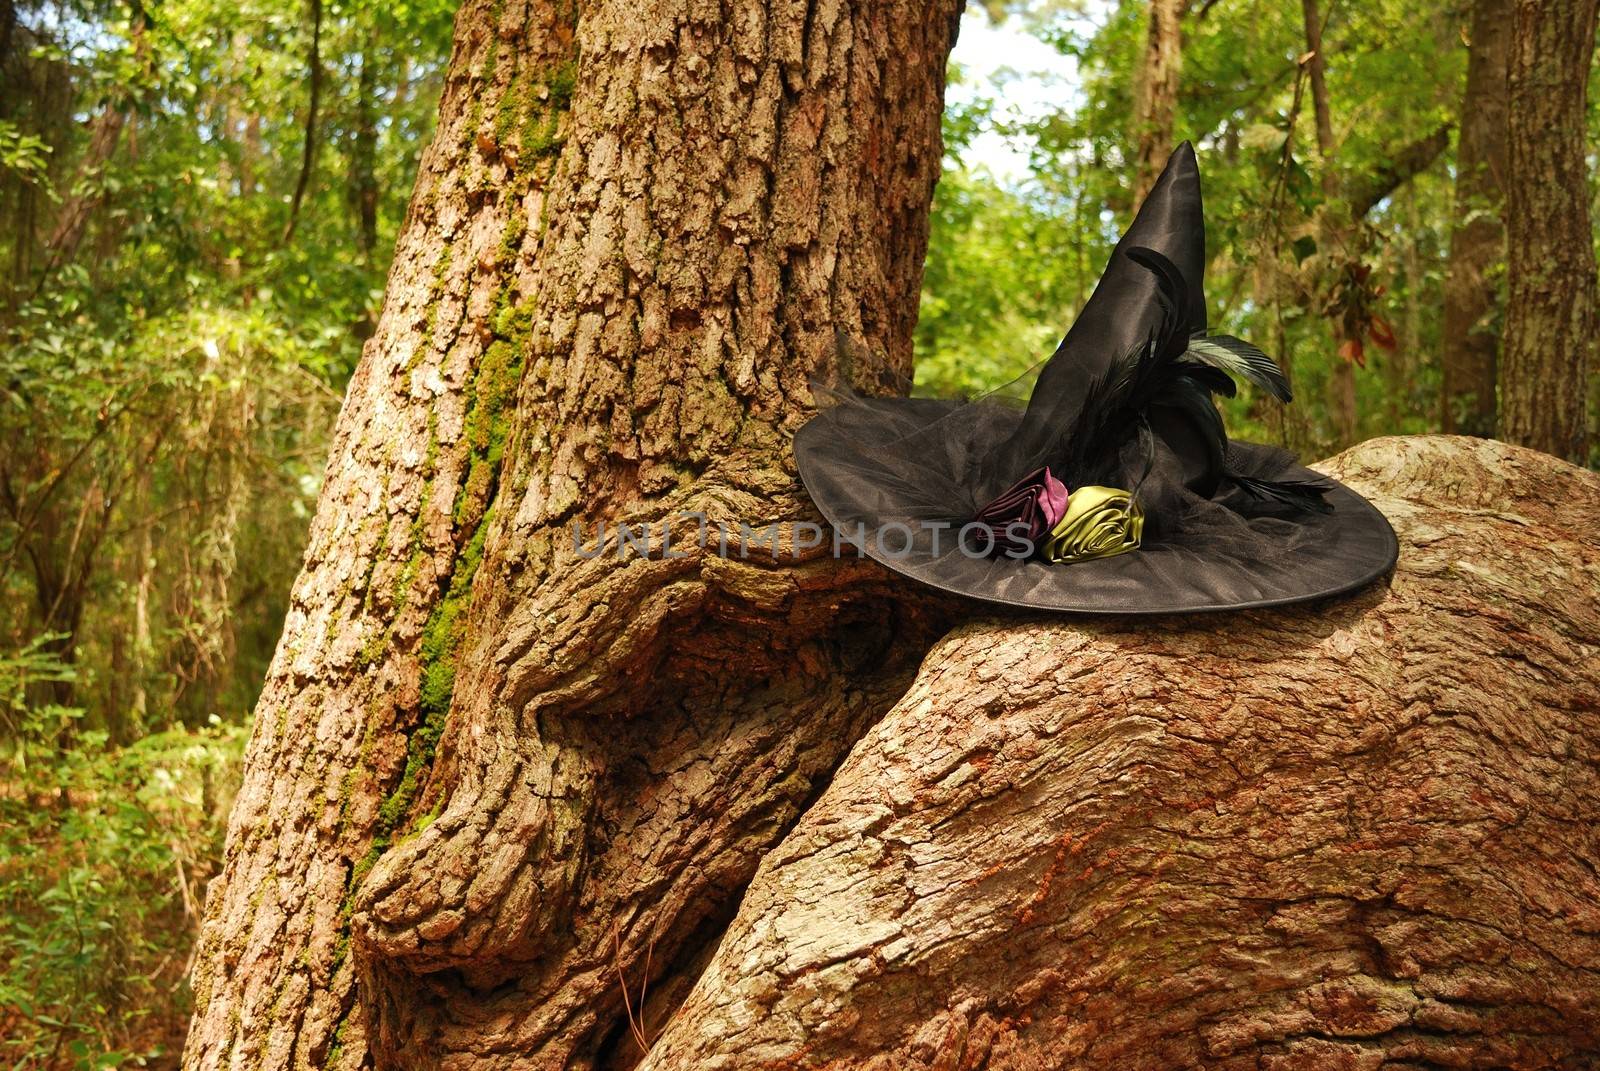 A witch's hat sits in the crook of a large tree in a forest